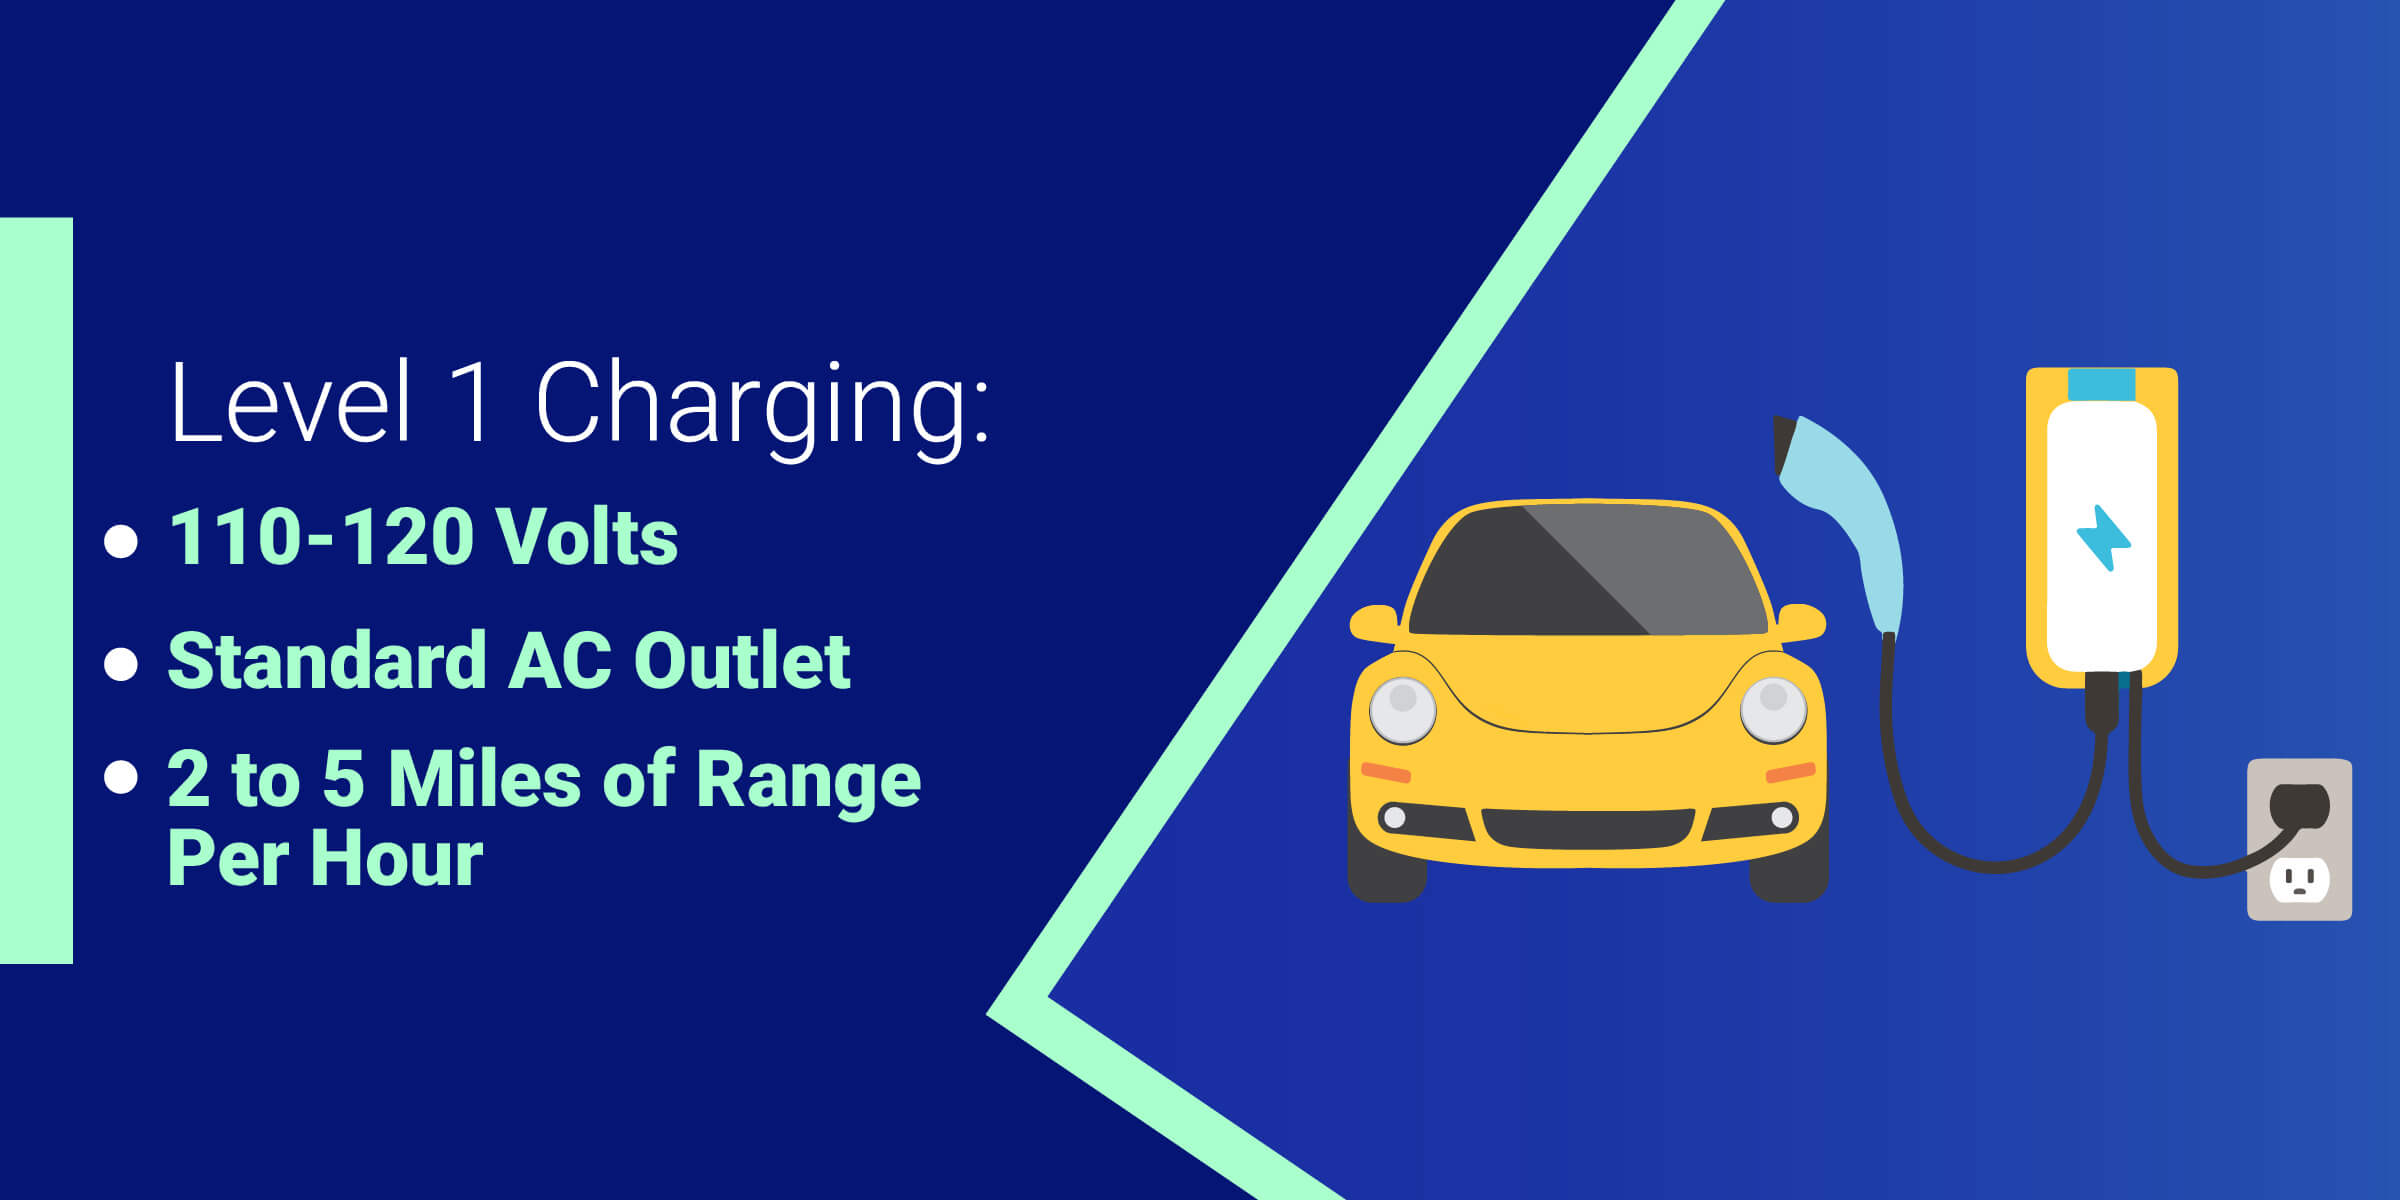 What does level 1 charging mean